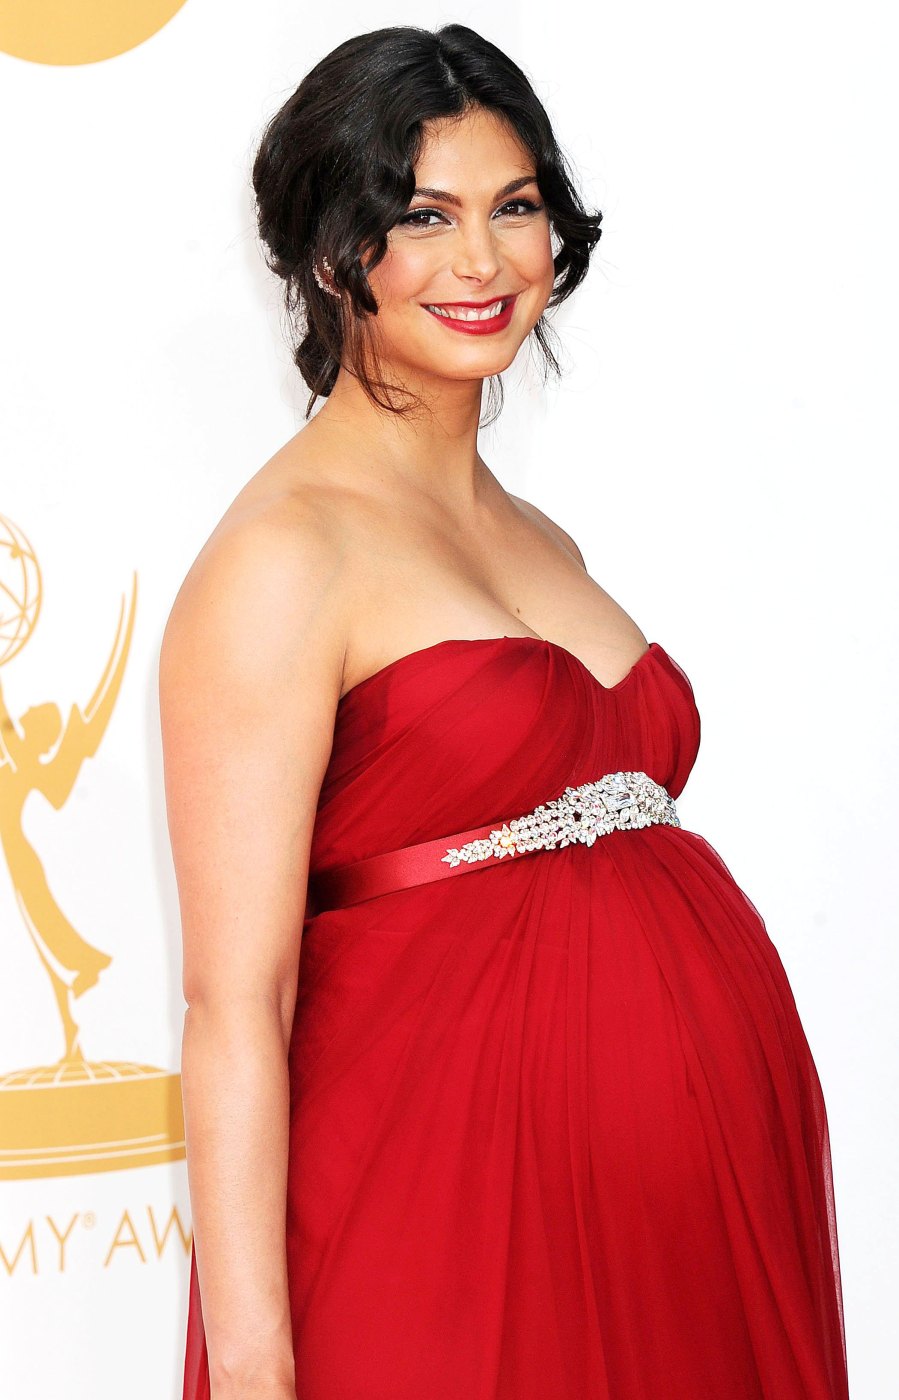 Emmy Awards Pregnant Stars Show Baby Bumps in Cute Pics